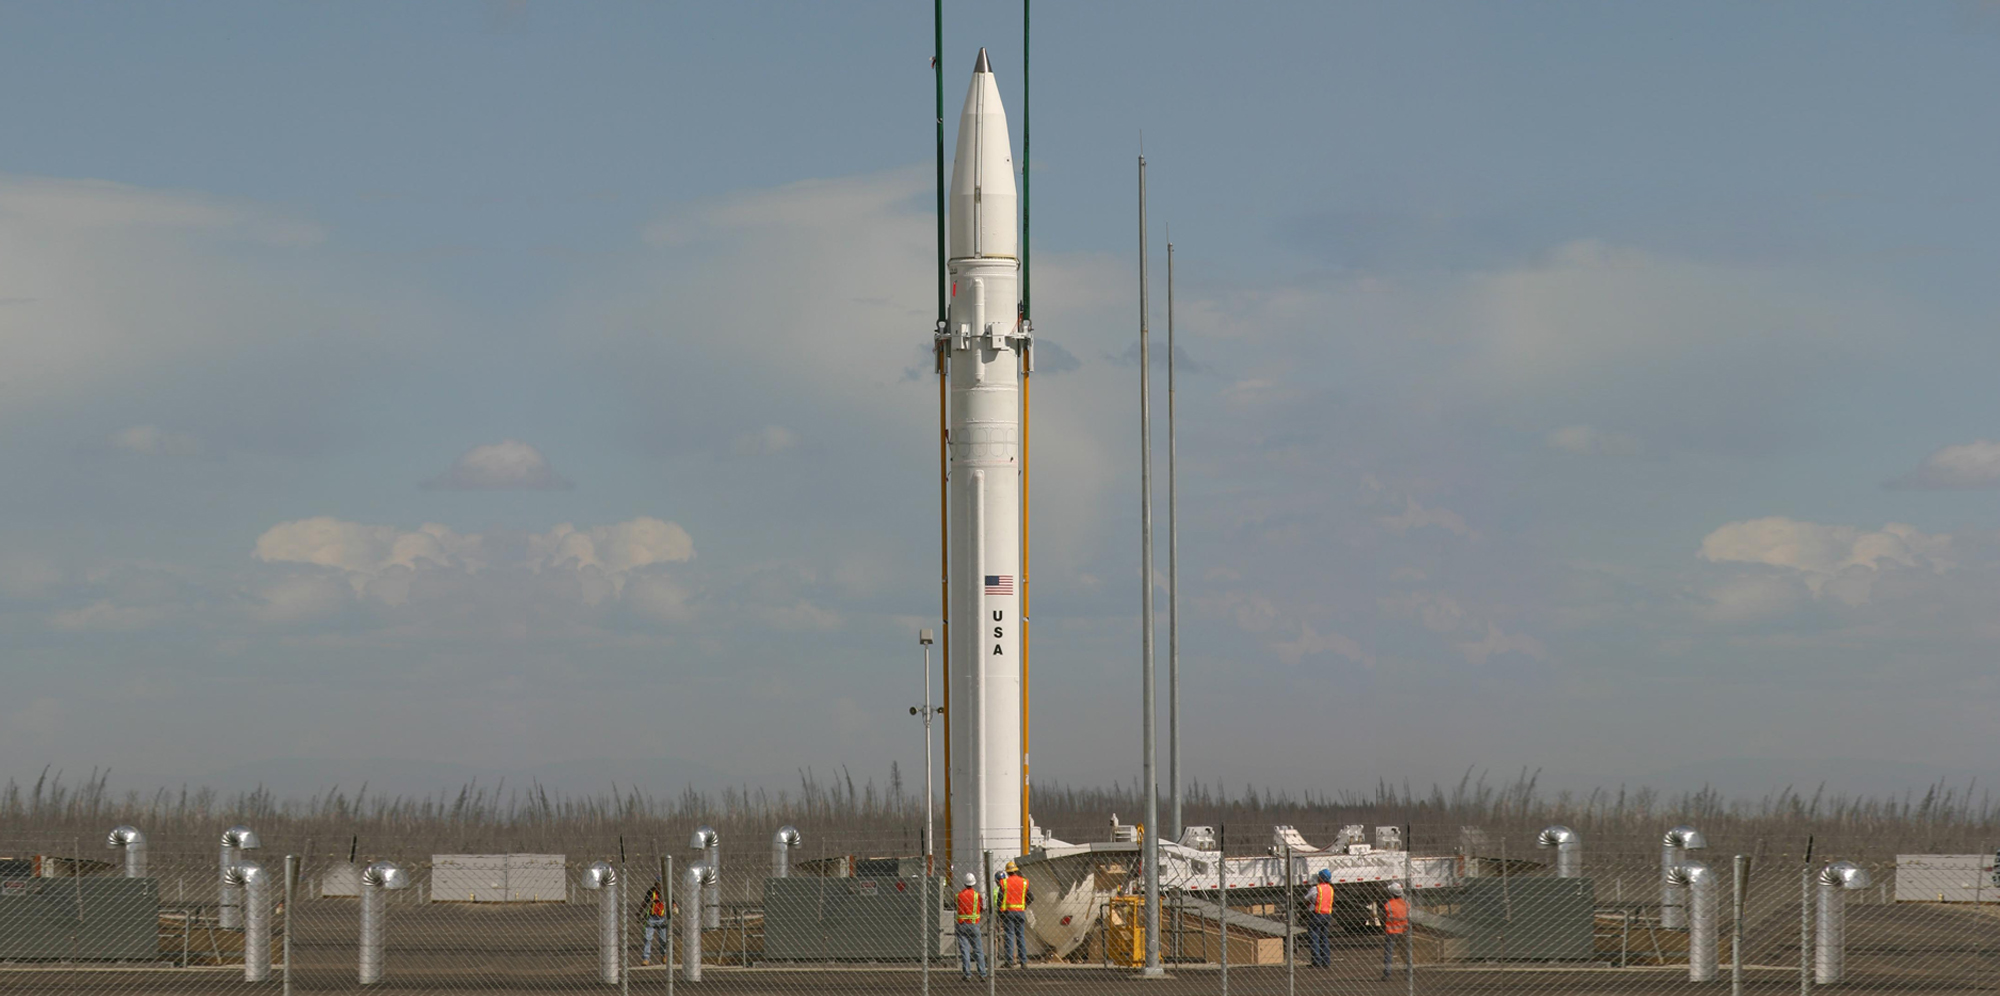 A white missile interceptor on a launchpad in front of blue light cloudy sky